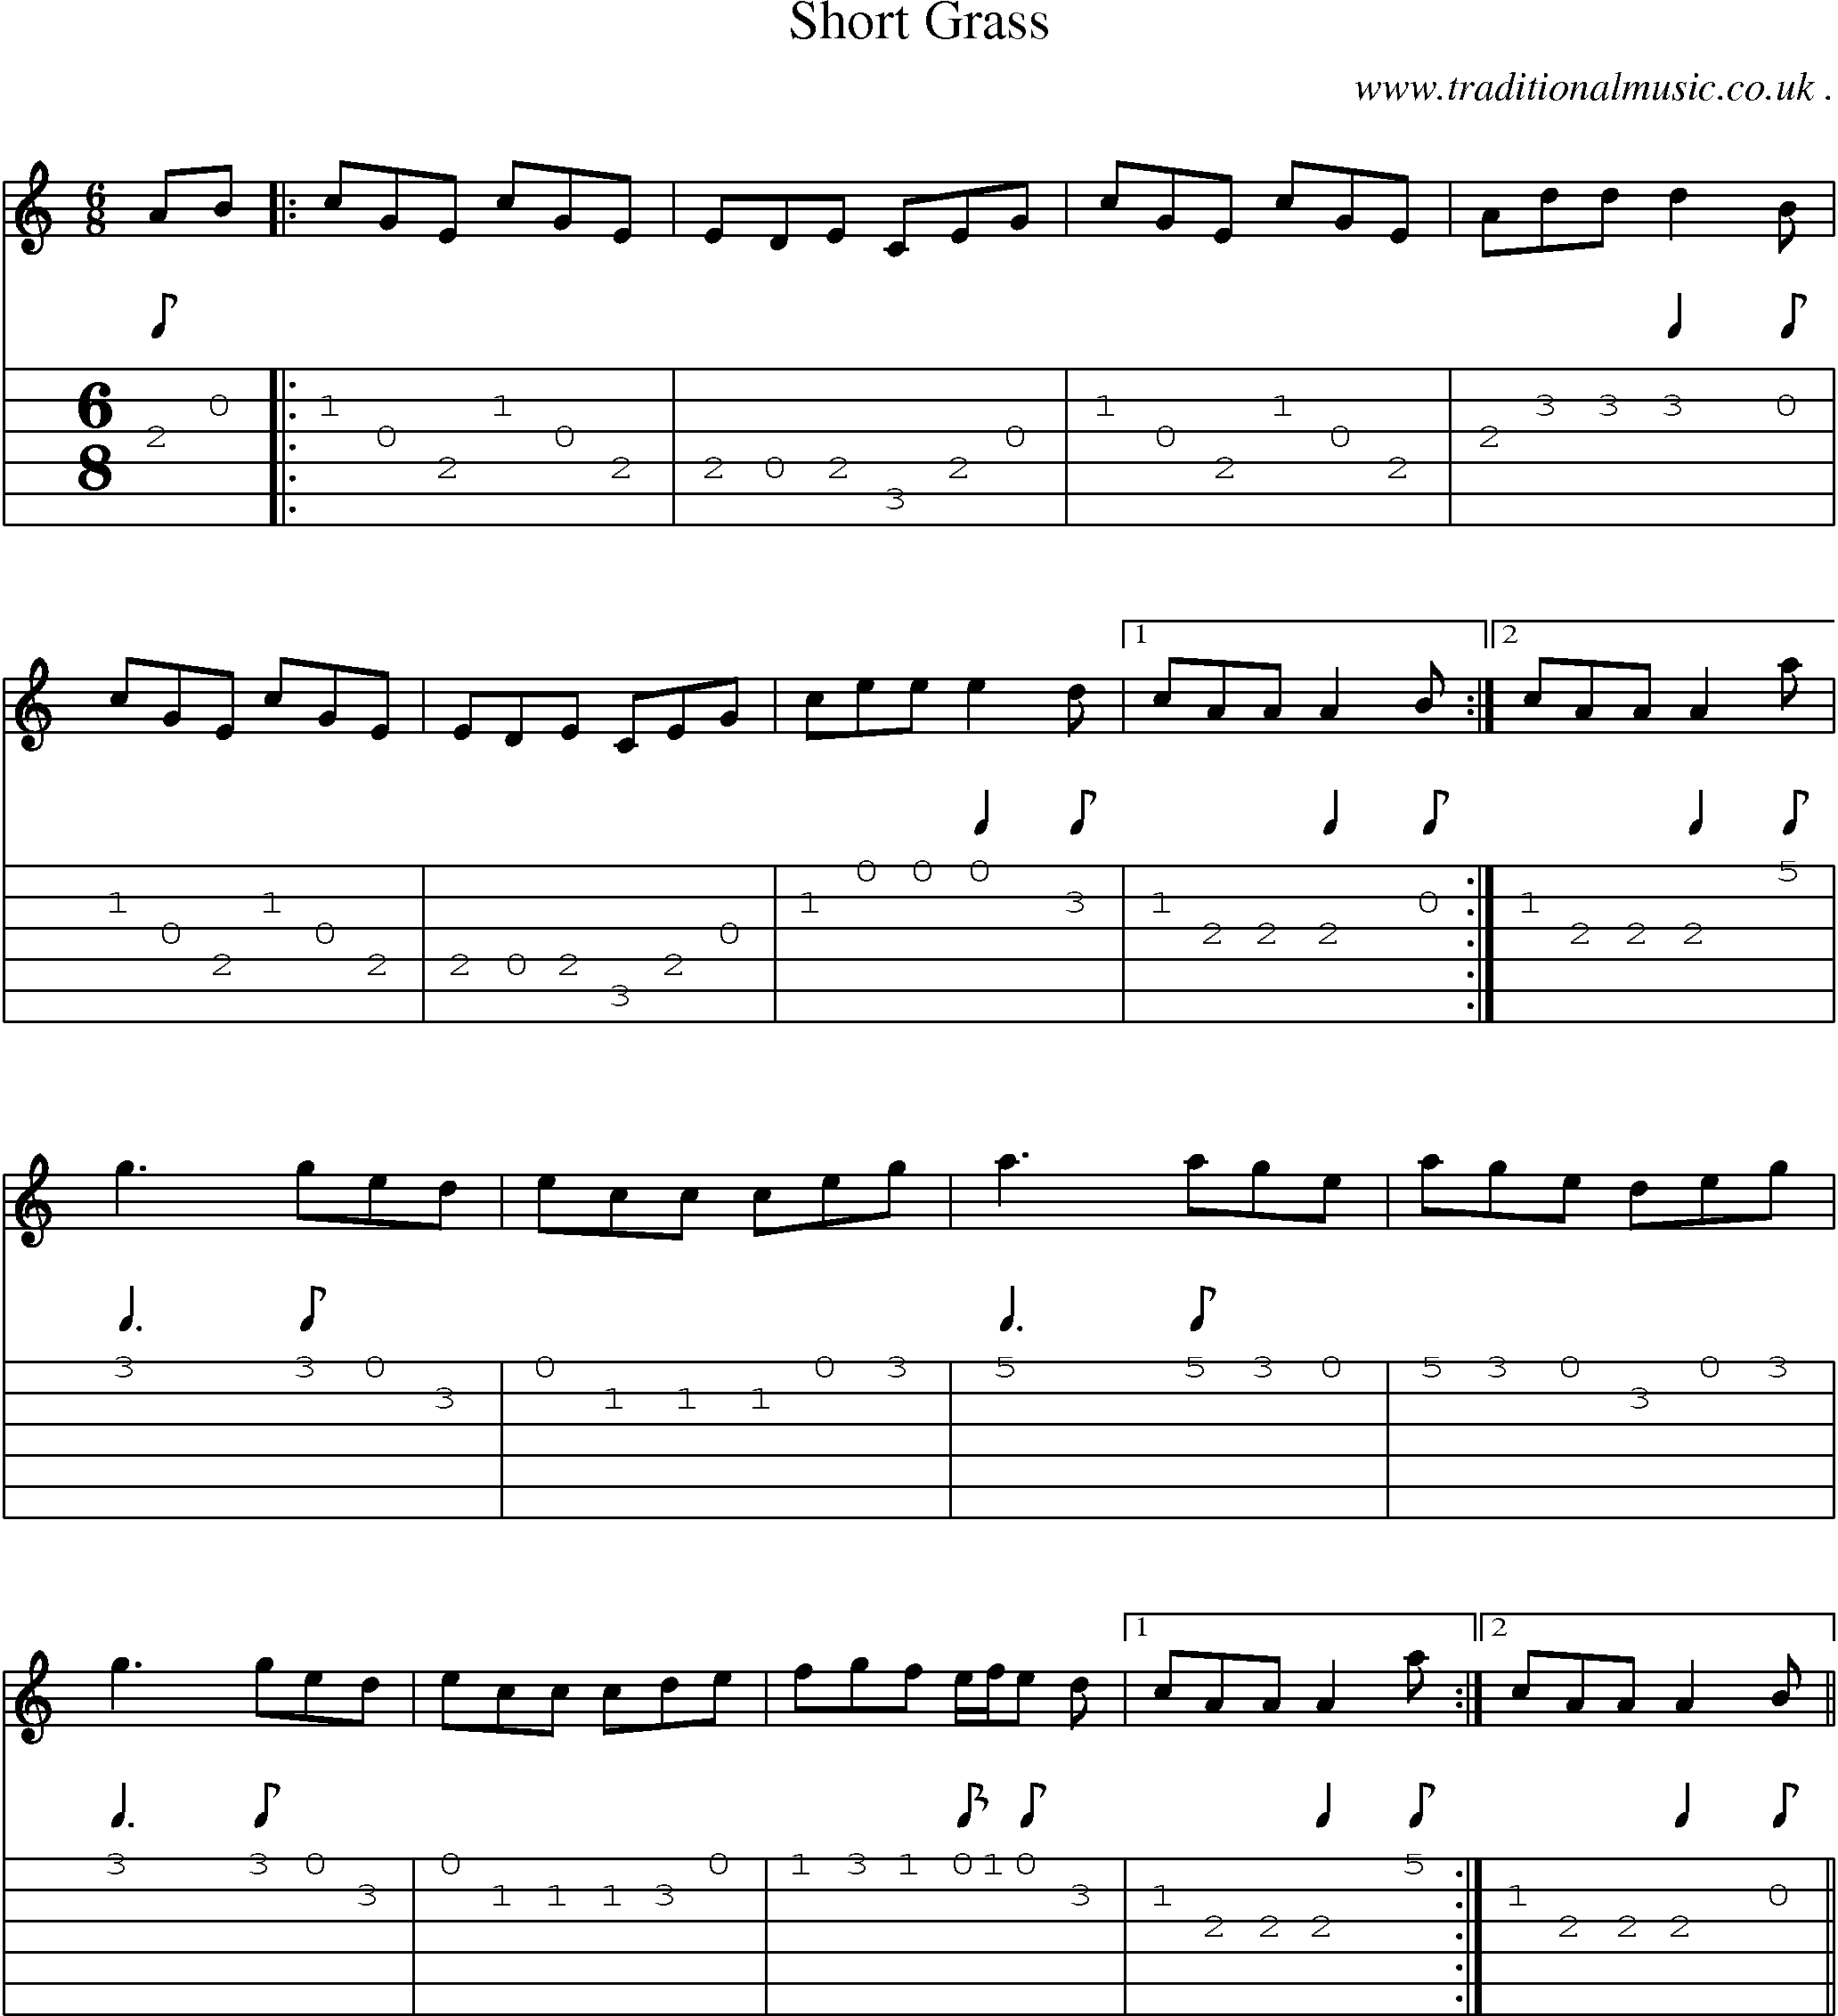 Sheet-Music and Guitar Tabs for Short Grass